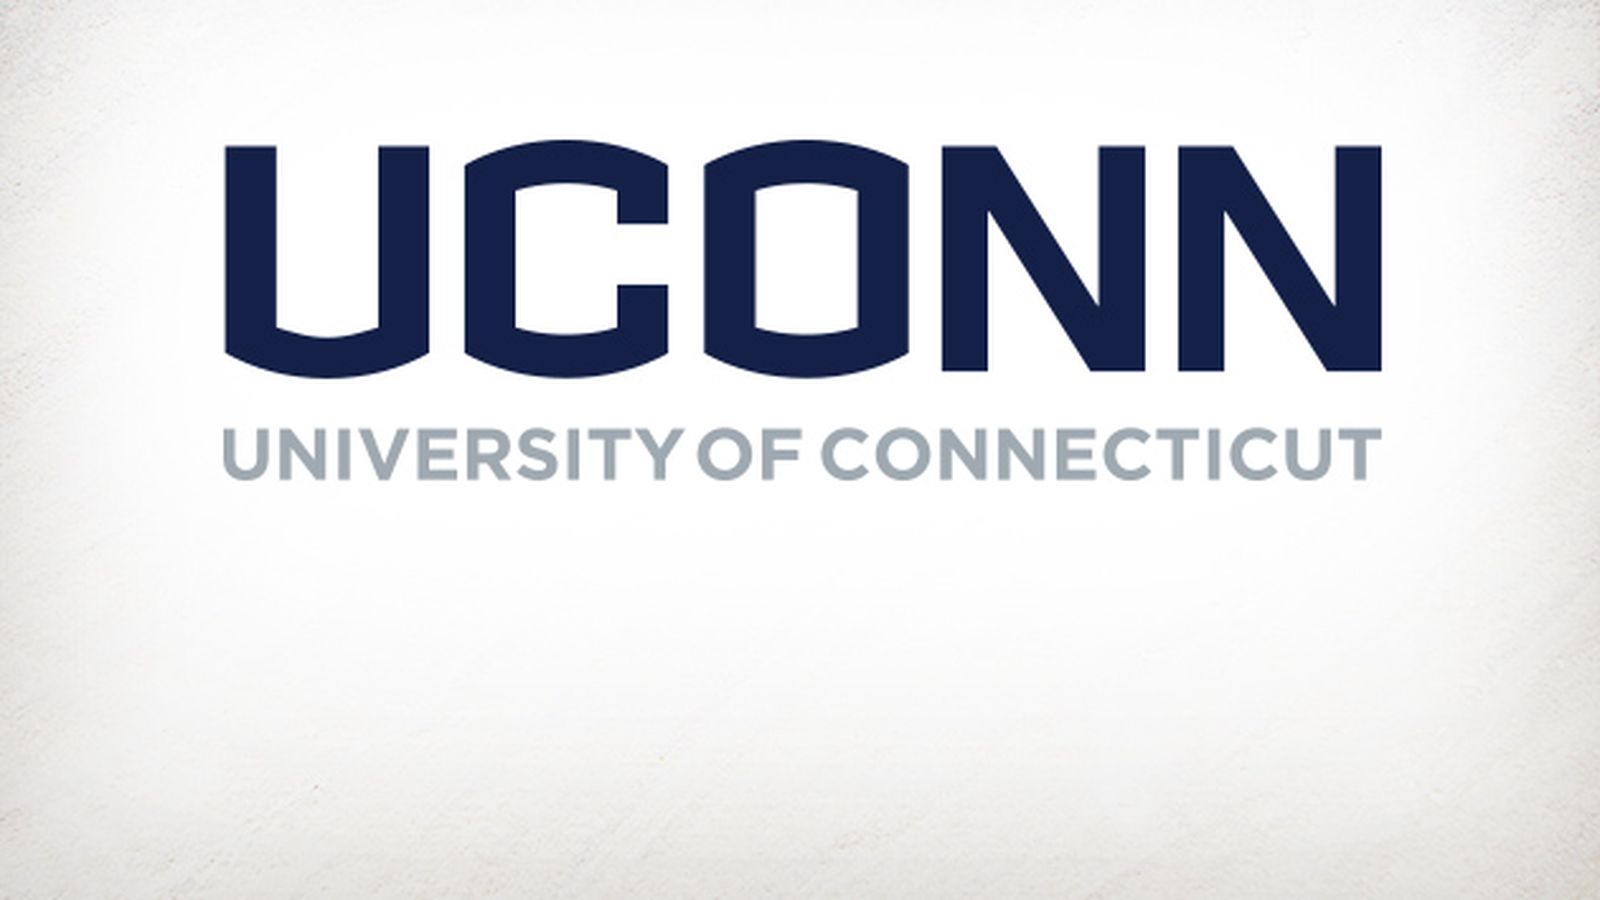 One school, one name, one brand UConn unveils new look - The